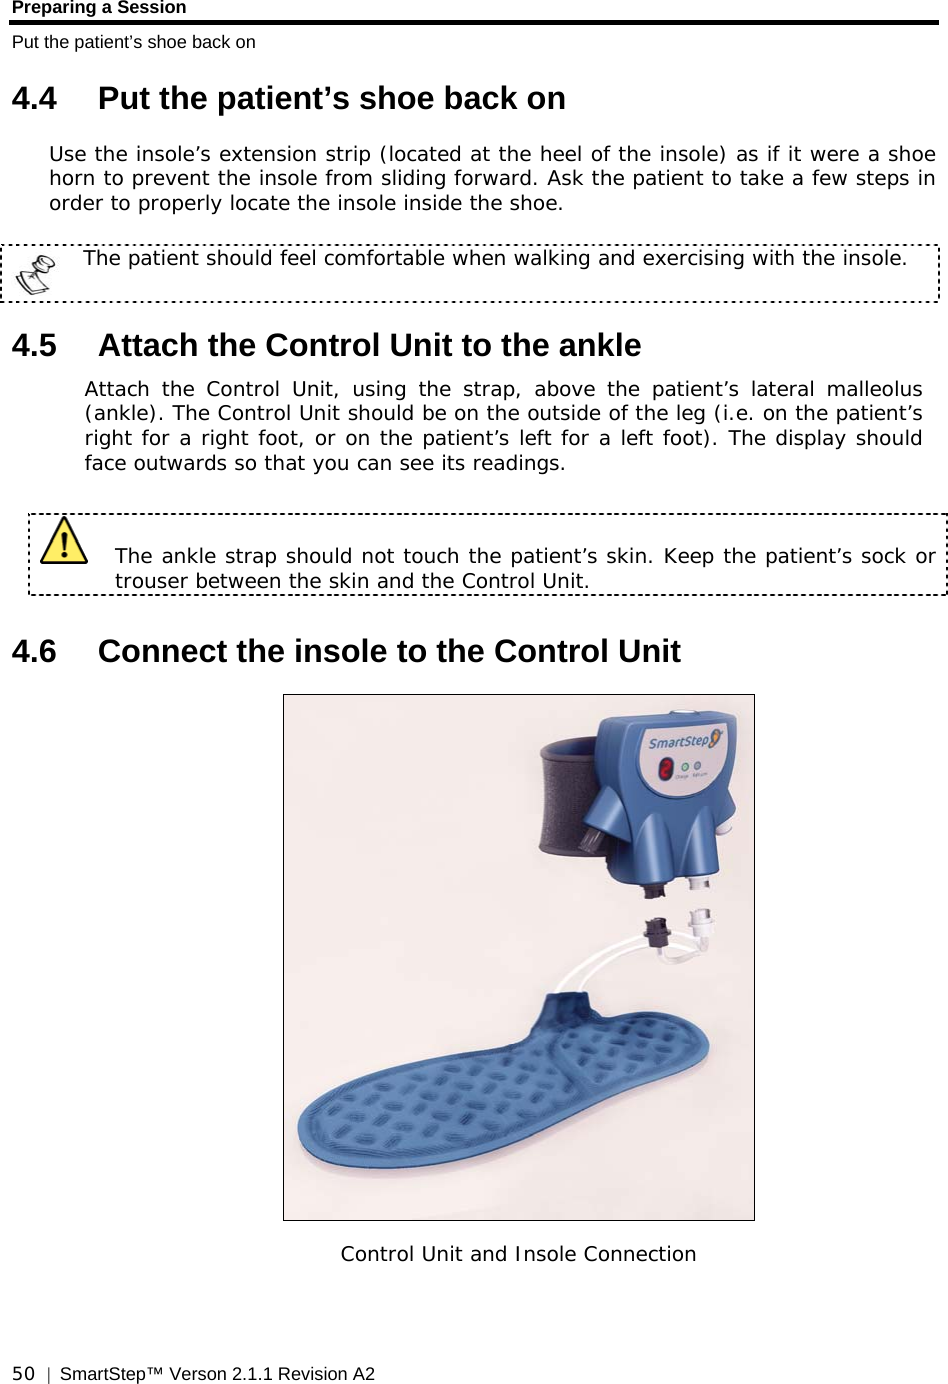 Preparing a Session Put the patient’s shoe back on  50  |  SmartStep™ Verson 2.1.1 Revision A2   4.4  Put the patient’s shoe back on Use the insole’s extension strip (located at the heel of the insole) as if it were a shoe horn to prevent the insole from sliding forward. Ask the patient to take a few steps in order to properly locate the insole inside the shoe.   The patient should feel comfortable when walking and exercising with the insole.  4.5  Attach the Control Unit to the ankle Attach the Control Unit, using the strap, above the patient’s lateral malleolus (ankle). The Control Unit should be on the outside of the leg (i.e. on the patient’s right for a right foot, or on the patient’s left for a left foot). The display should face outwards so that you can see its readings.    The ankle strap should not touch the patient’s skin. Keep the patient’s sock or trouser between the skin and the Control Unit. 4.6  Connect the insole to the Control Unit   Control Unit and Insole Connection  